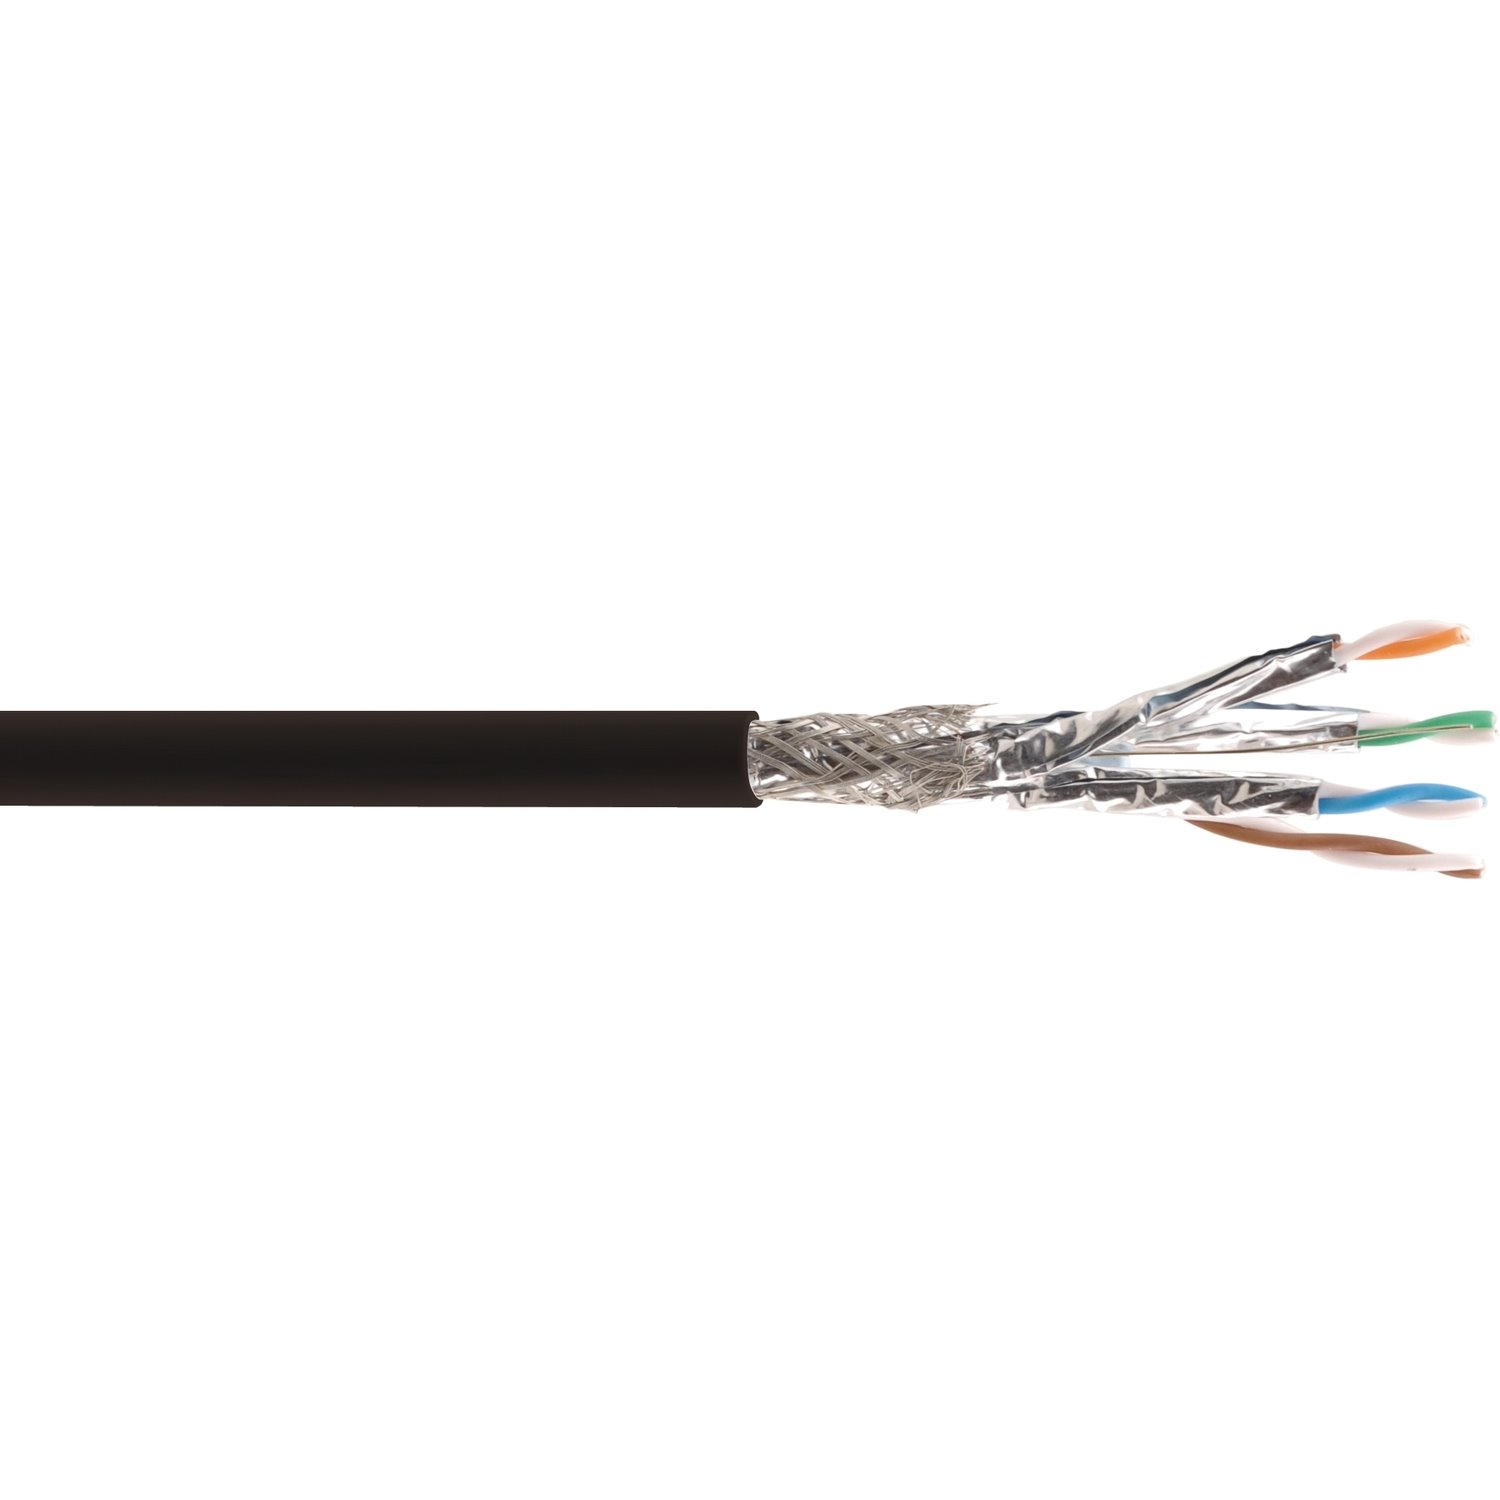 Kramer Plenum Rated Four-Pair STP Data Cable - 23 AWG